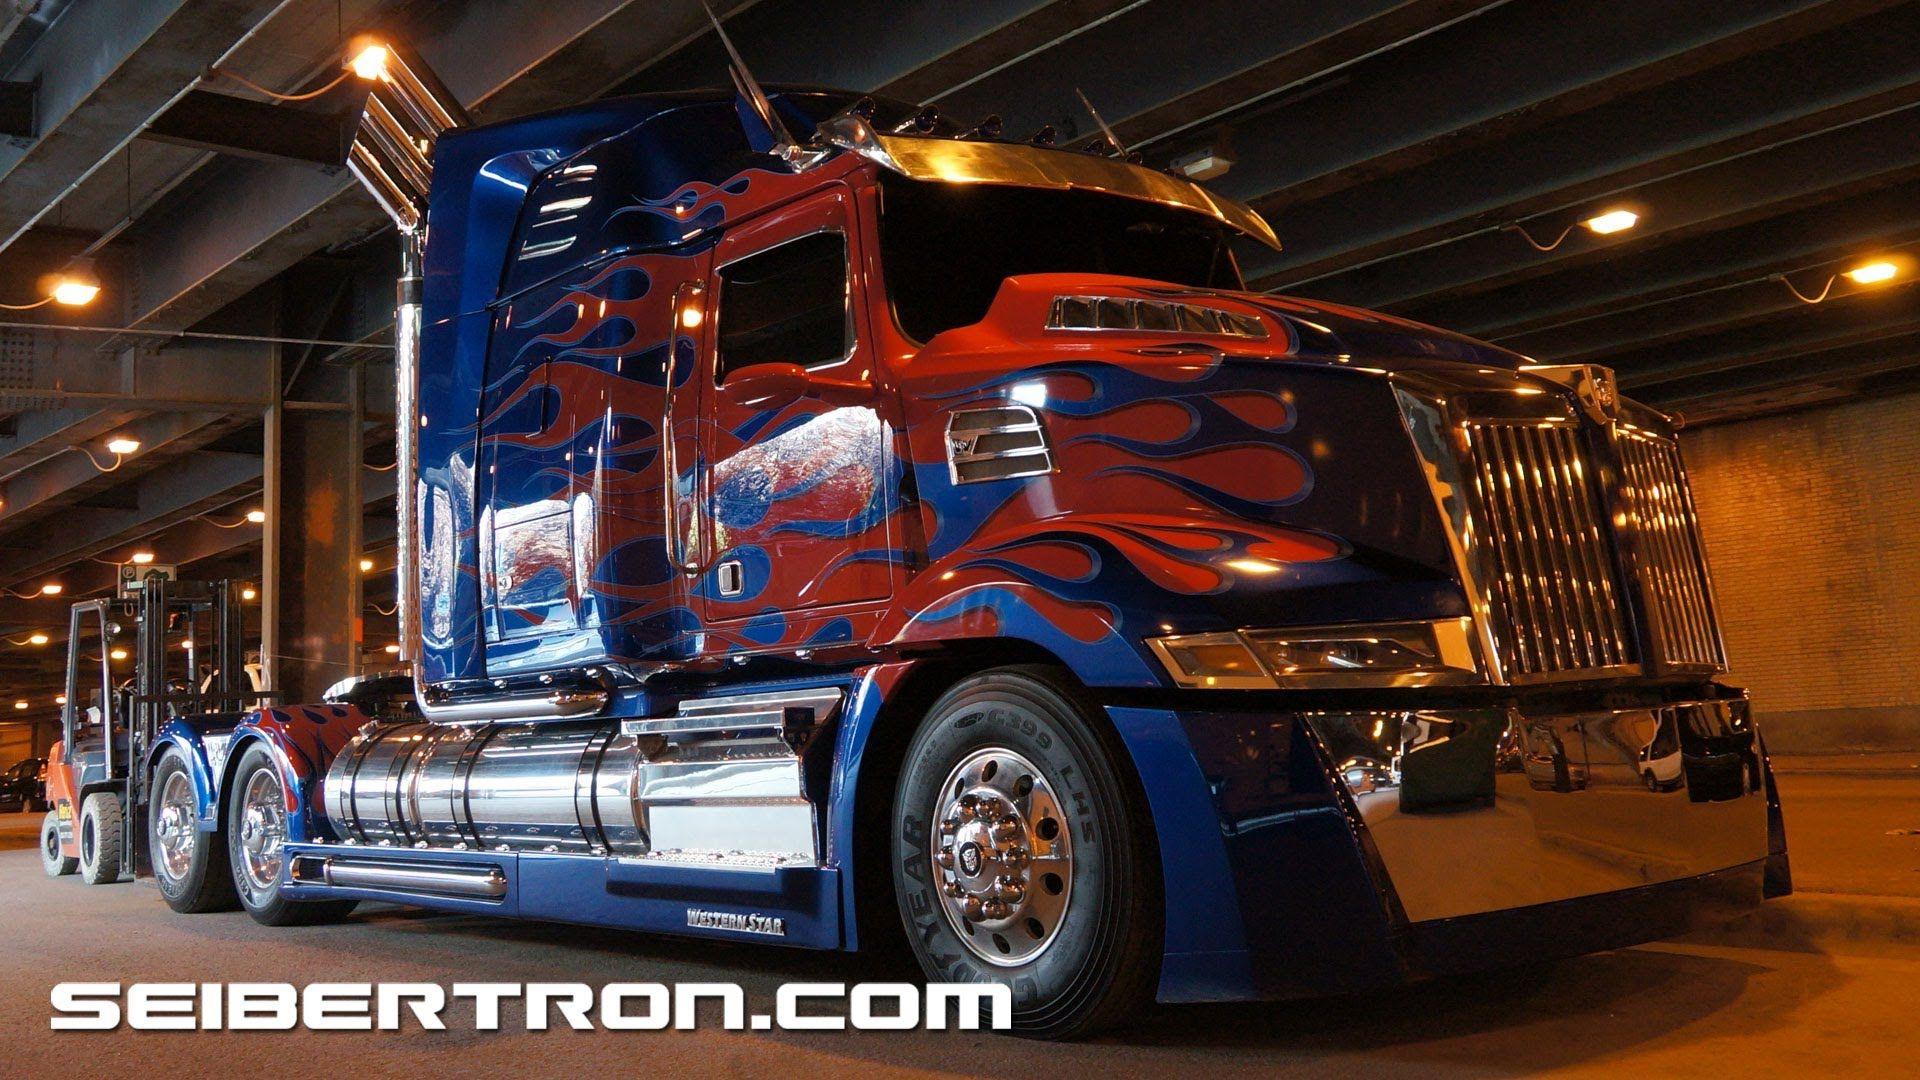 Transformers 4 filming in Chicago + Optimus Prime + Hound